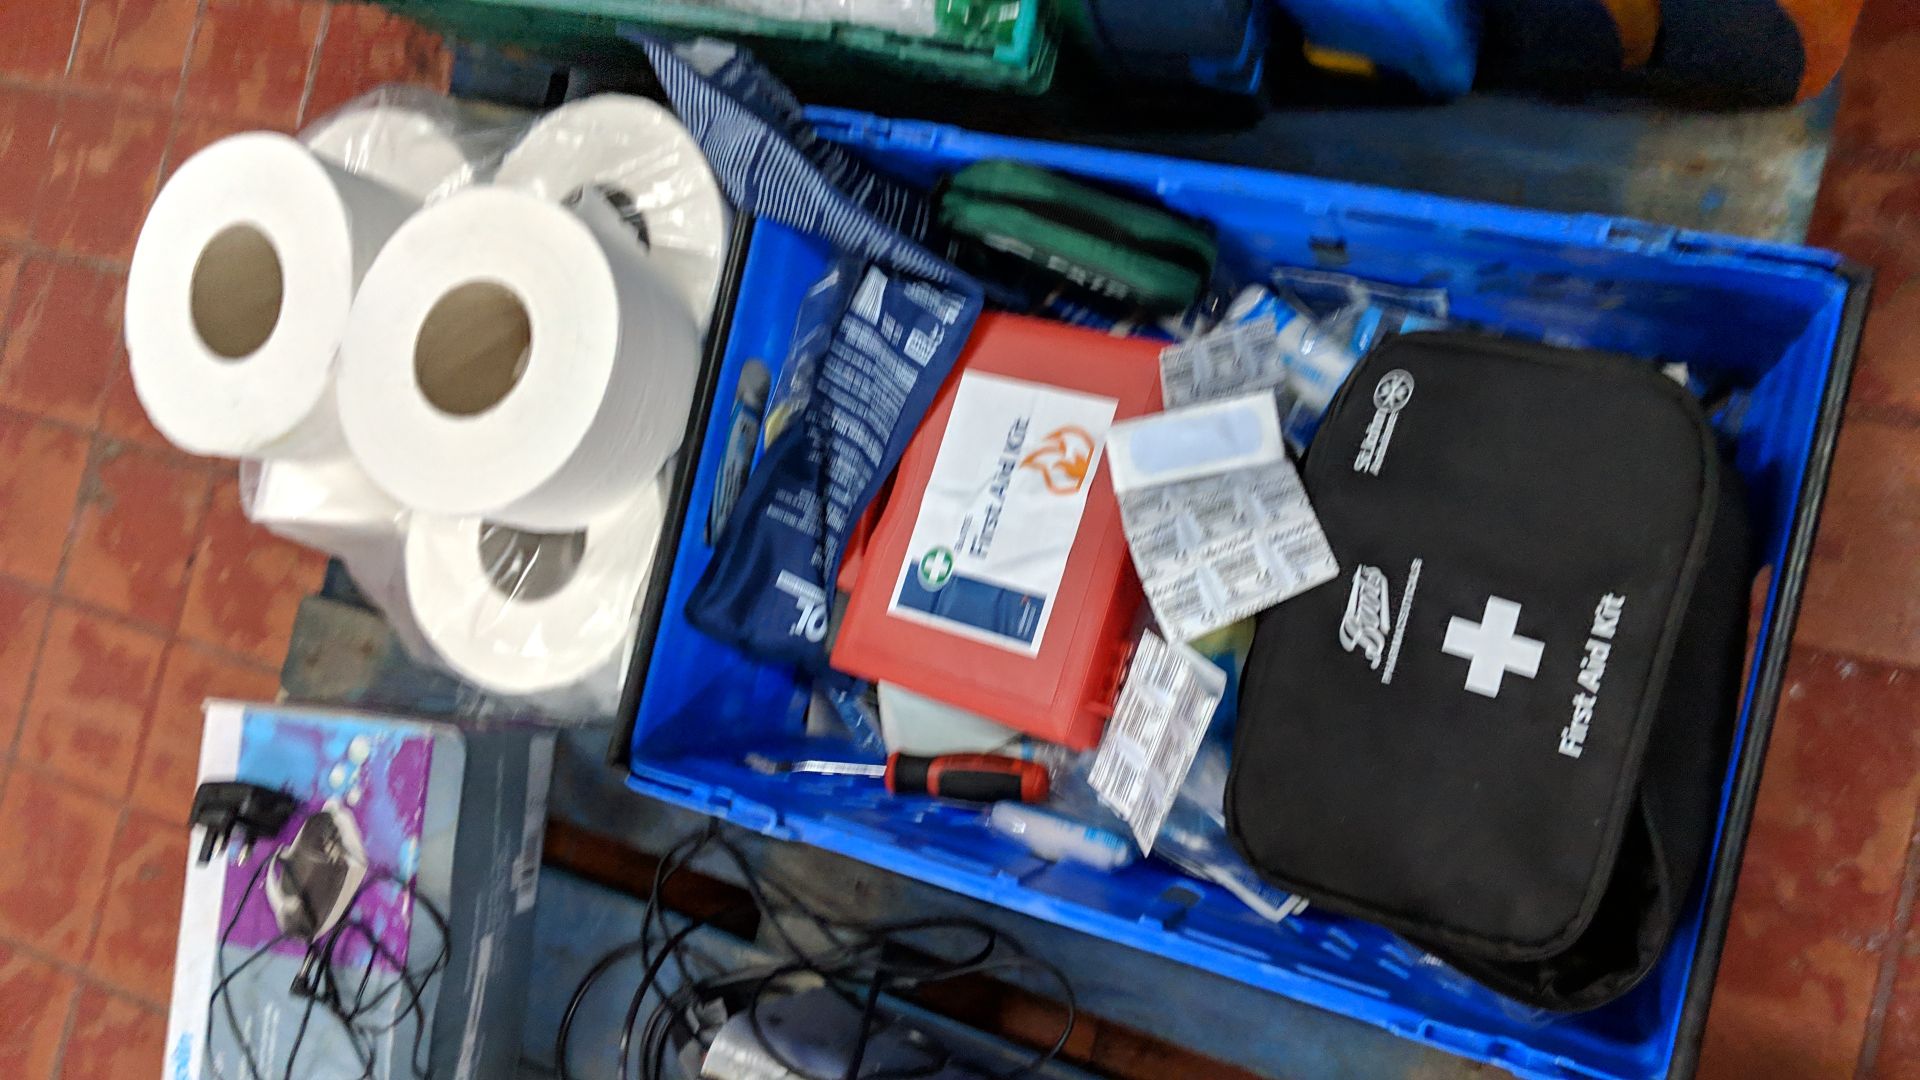 Double row of first aid equipment & cleaning consumables e.g. mop heads & rolls of toilet tissue - Bild 8 aus 9